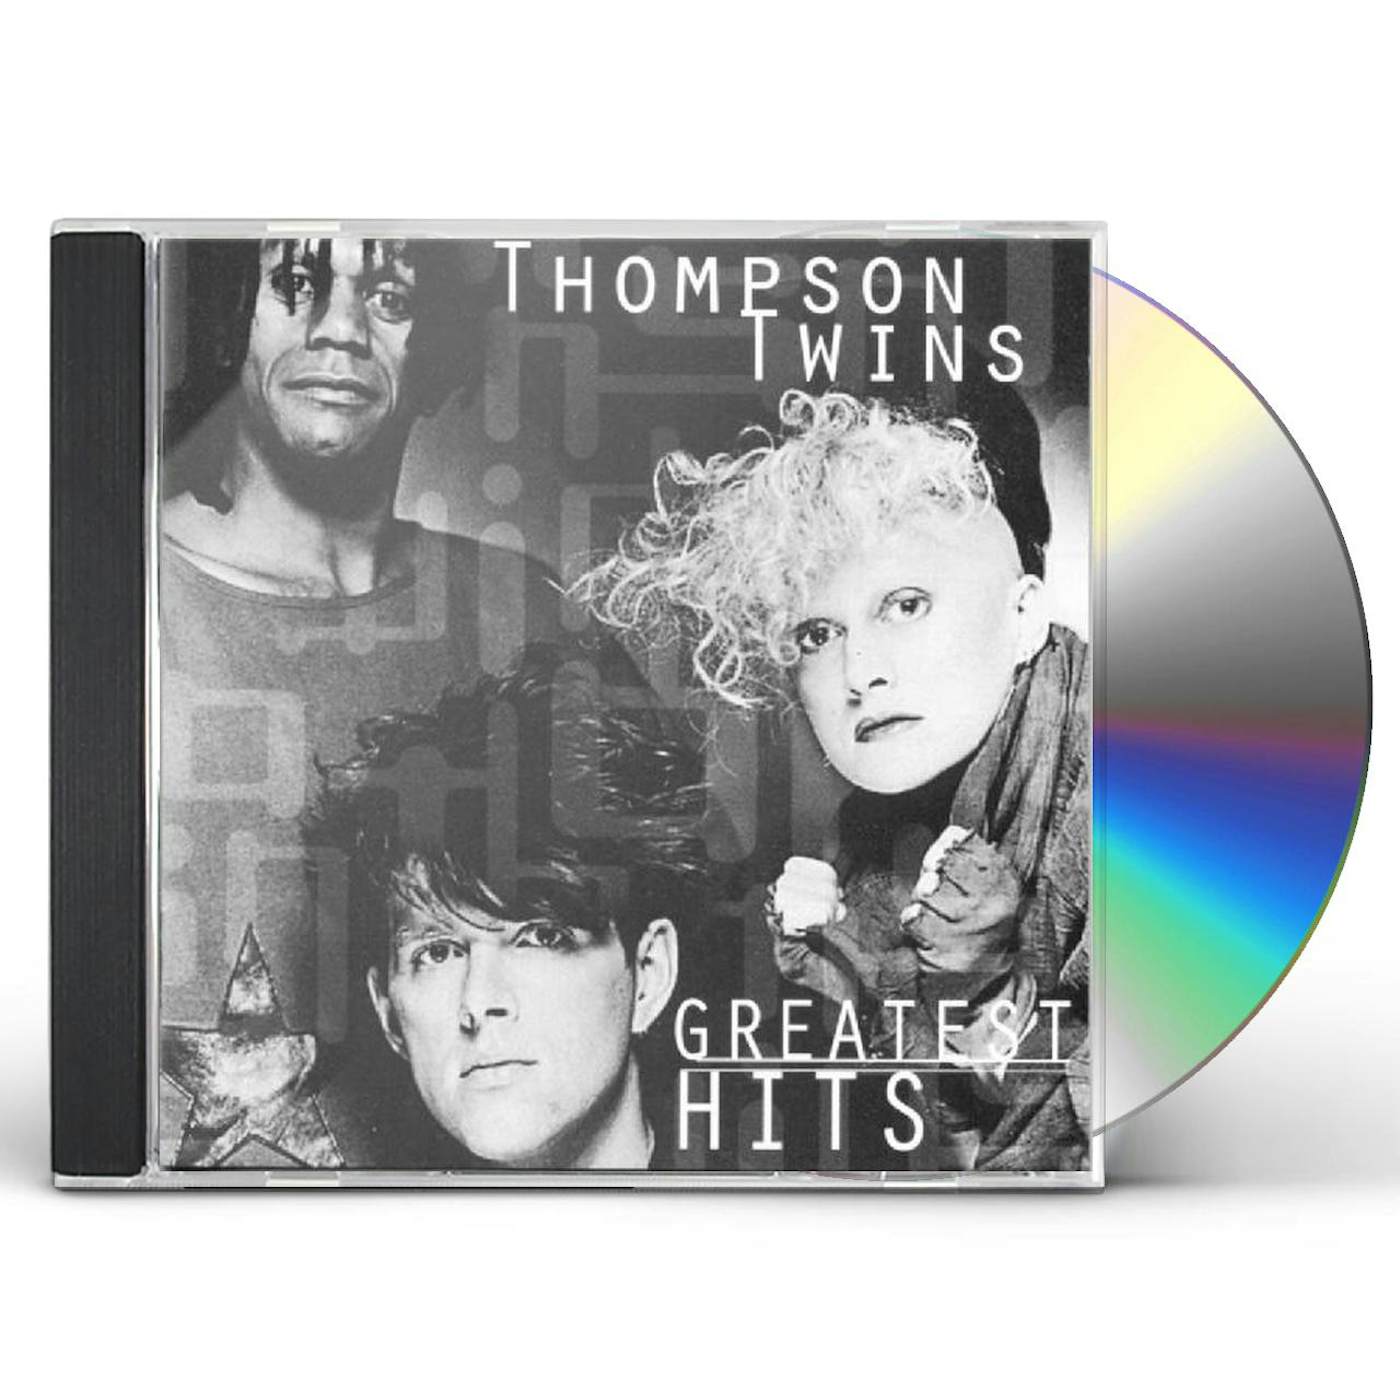 Thompson Twins - Into The Gap (Deluxe Edition) (Vinyl) - Pop Music